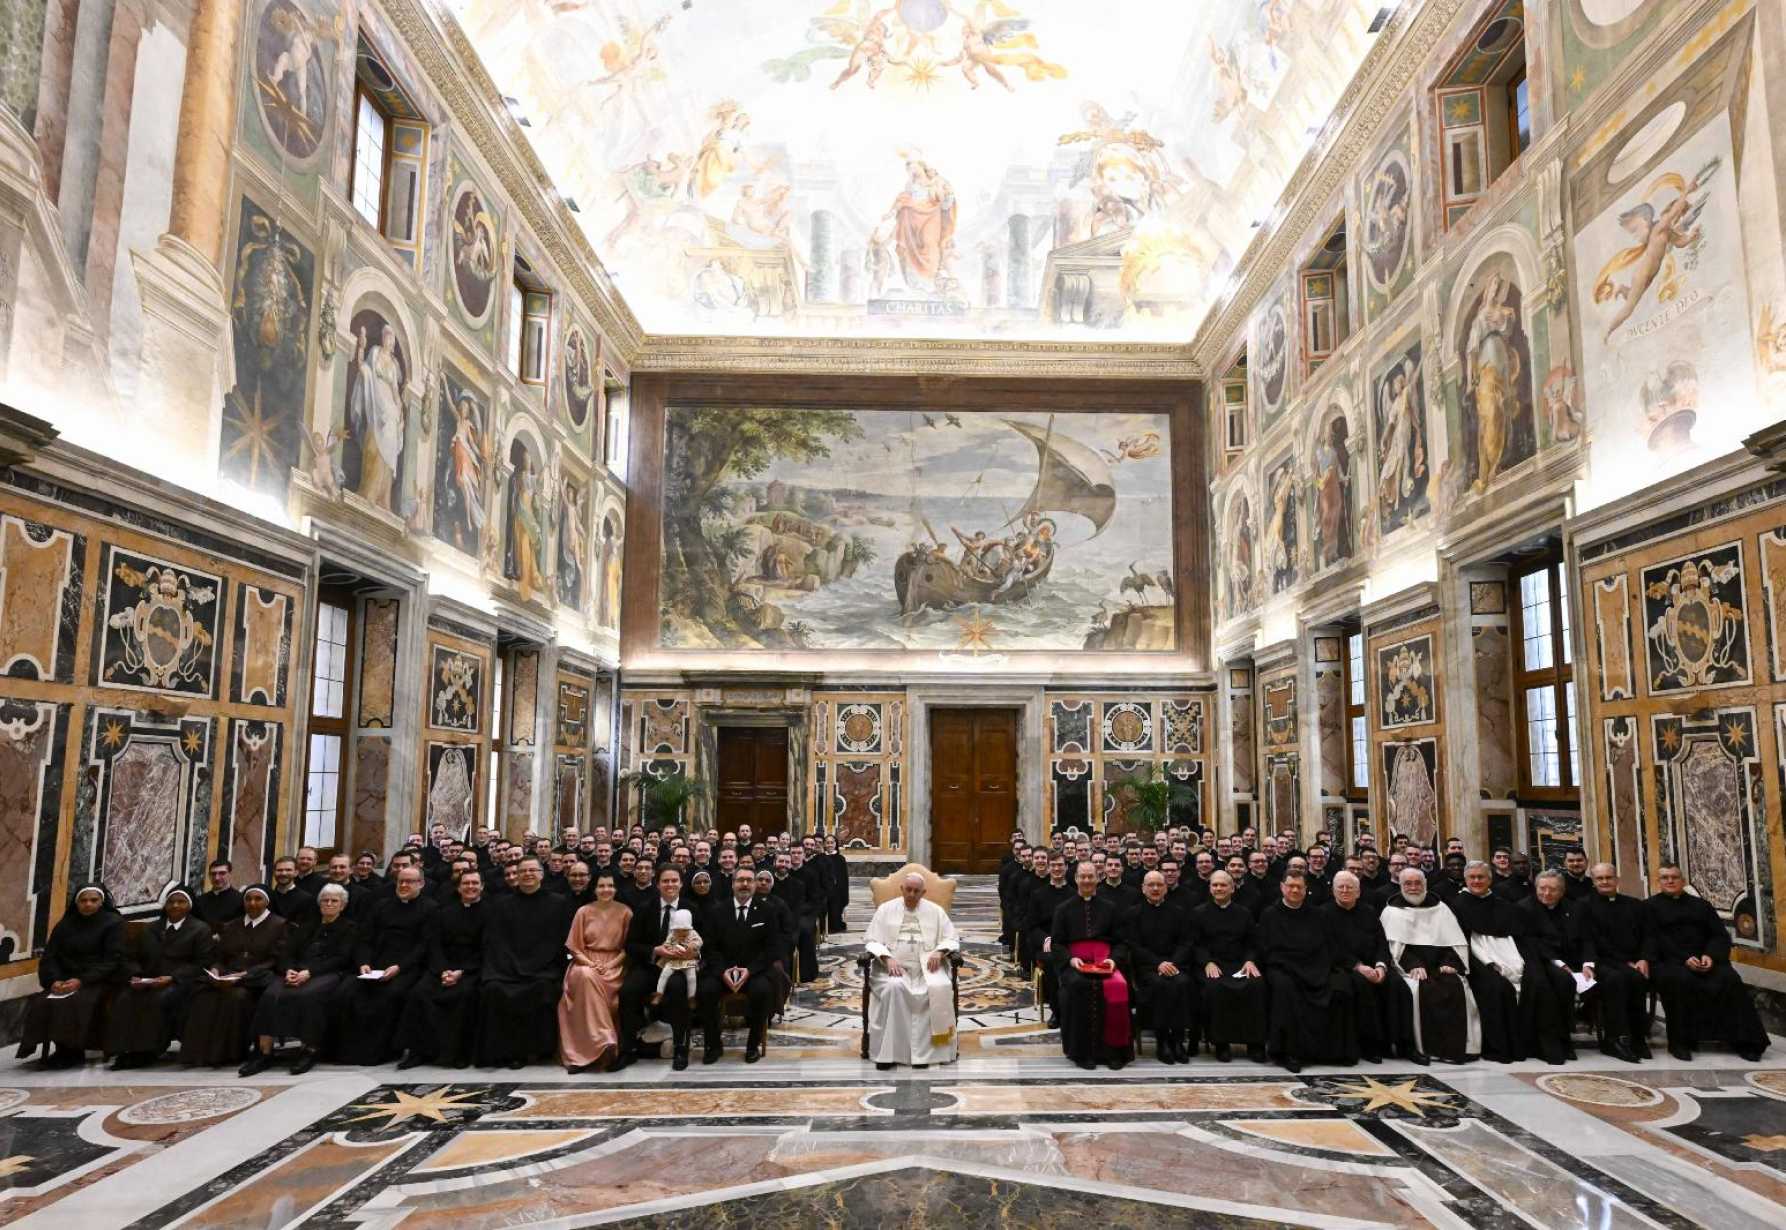 Faith is a call to service and mission, pope tells U.S. seminarians